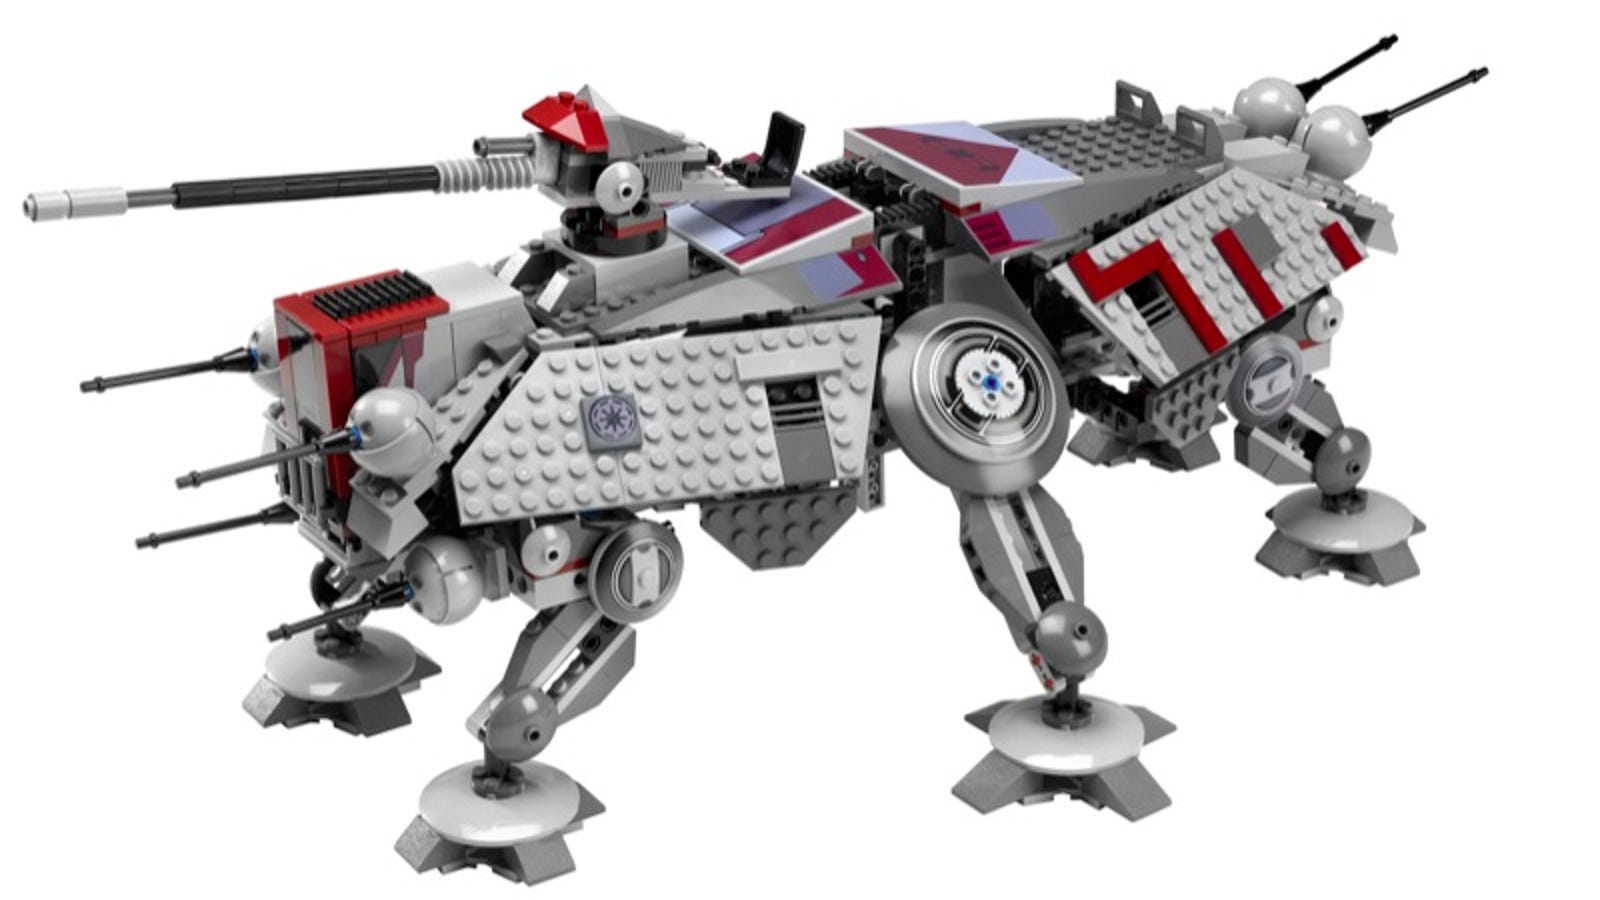 LEGO New Clone Wars Sets Will Excite Whoever Gets Excited by Clone Wars